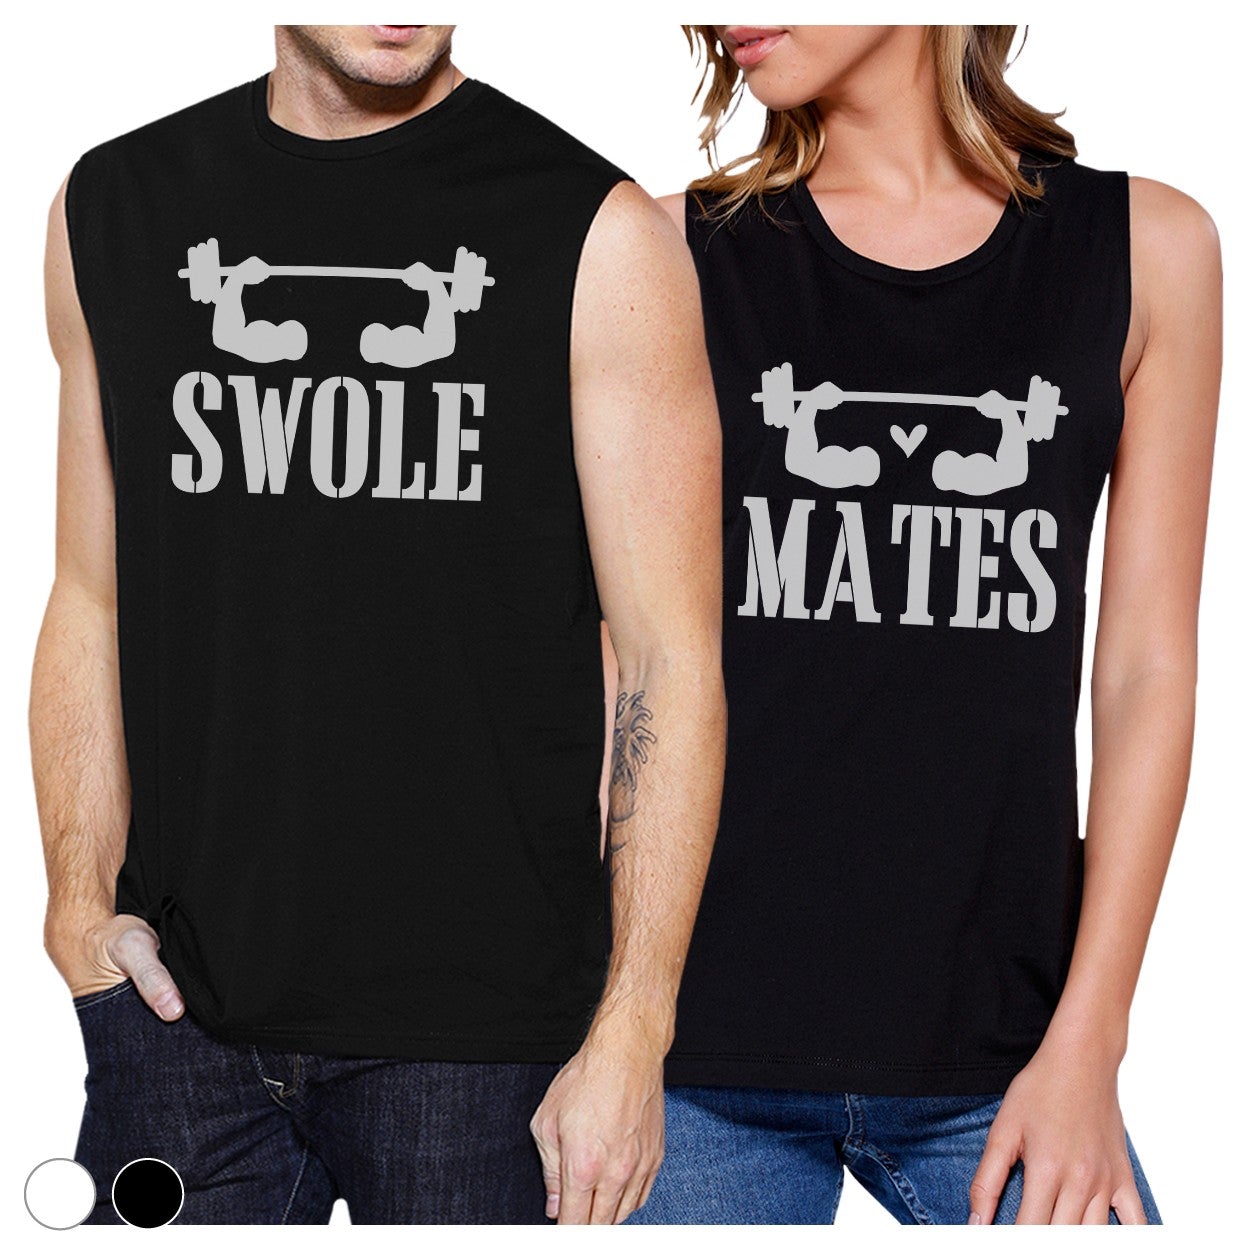 Swole Mates Funny Workout Tops Funny Matching Gifts Couple Muscle